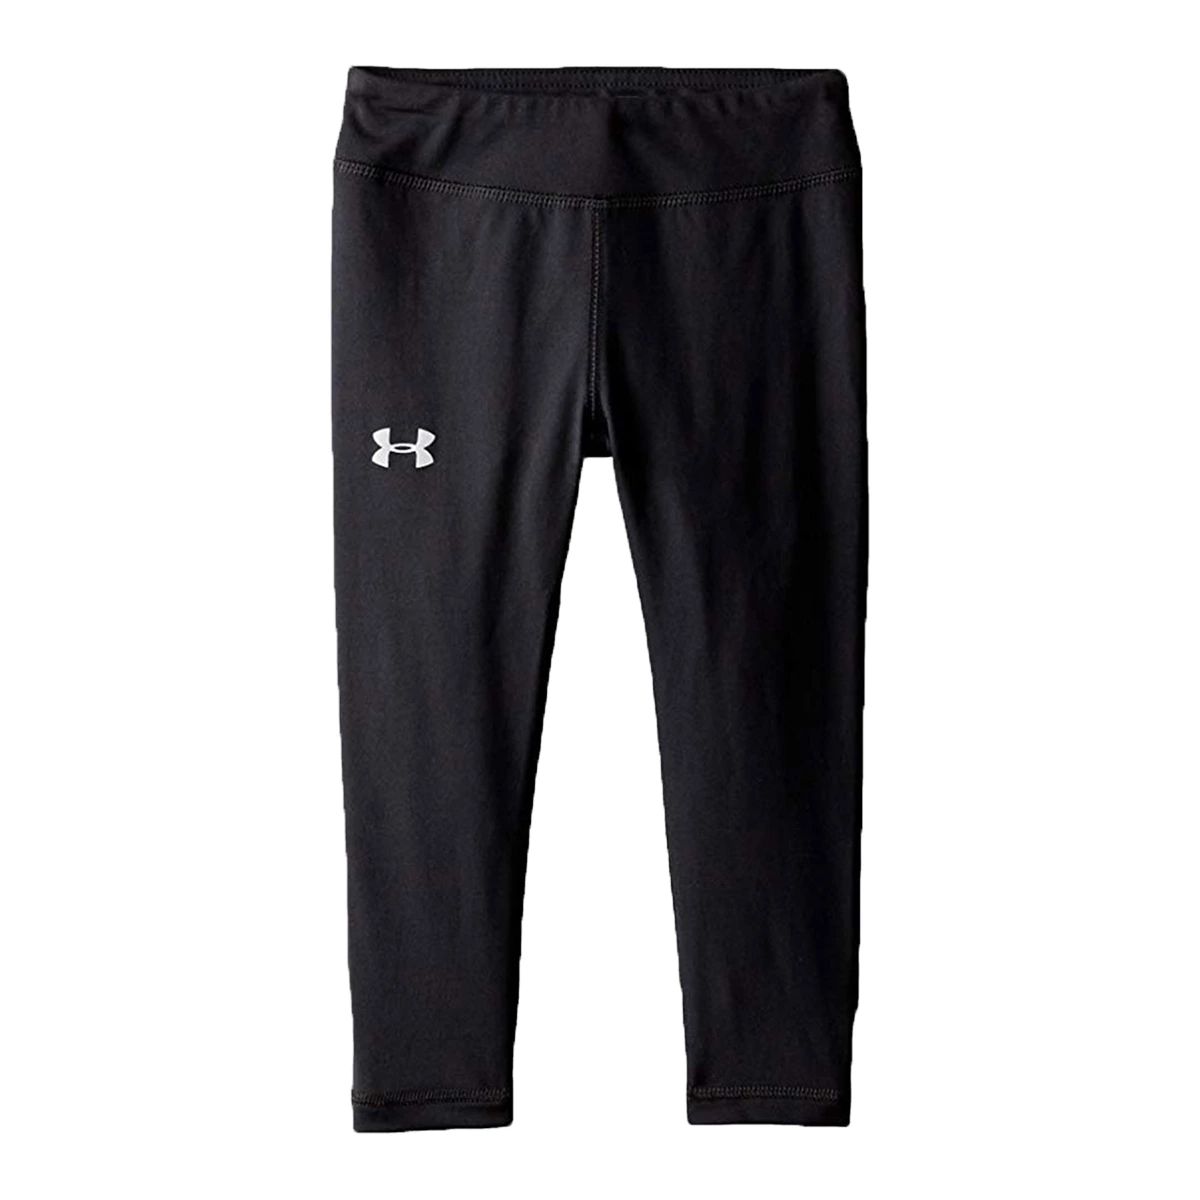 Under Armour Kids' Toddler Girls' 4-6X Girls’ Everyday Leggings, Casual,  Stretch